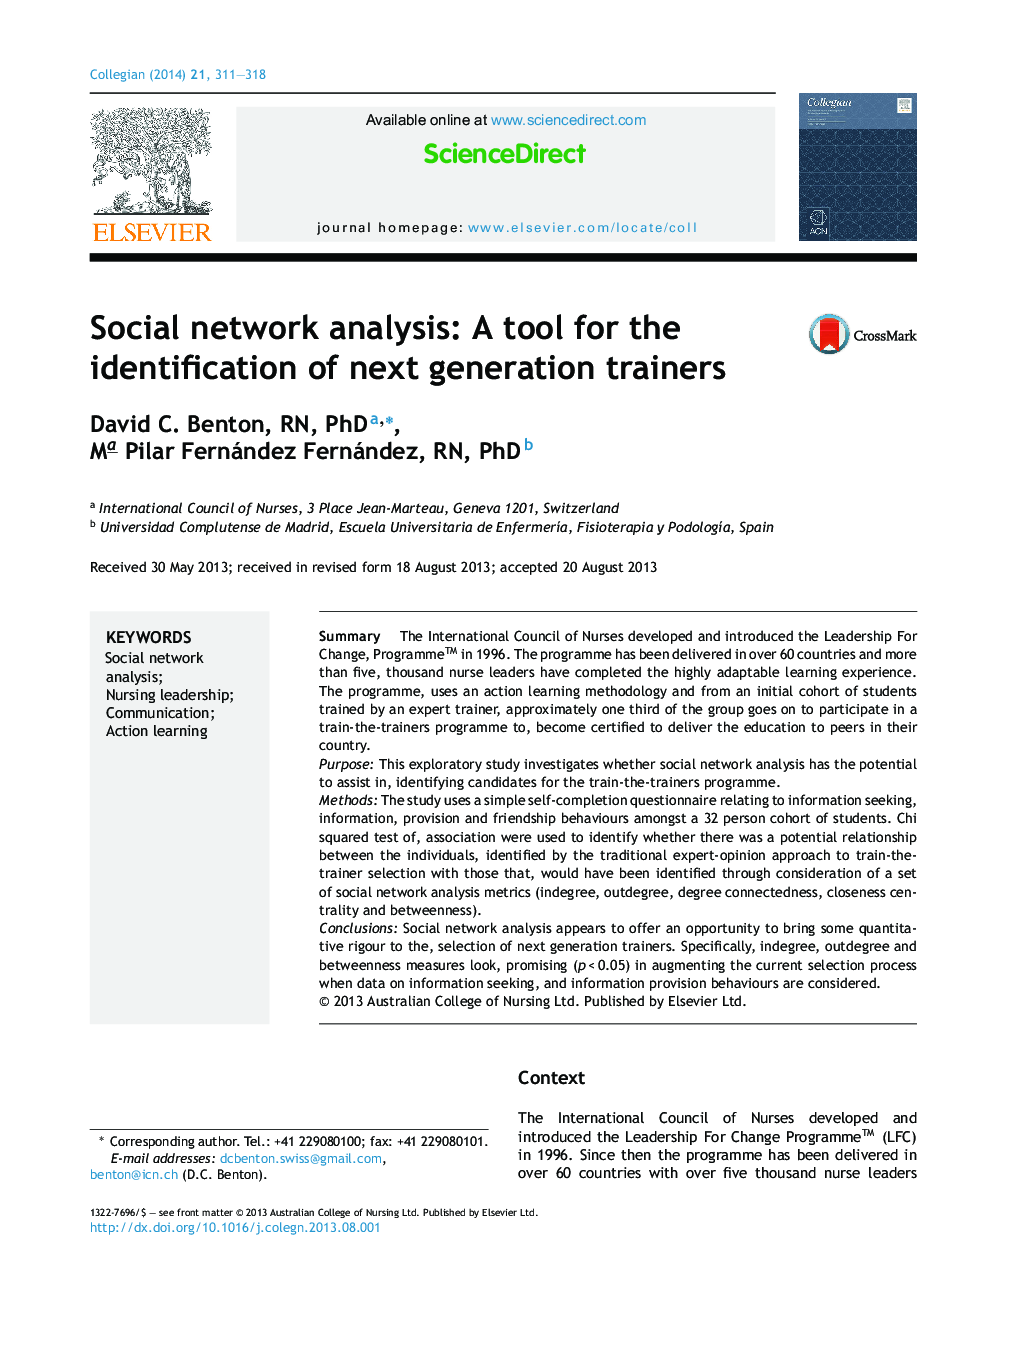 Social network analysis: A tool for the identification of next generation trainers